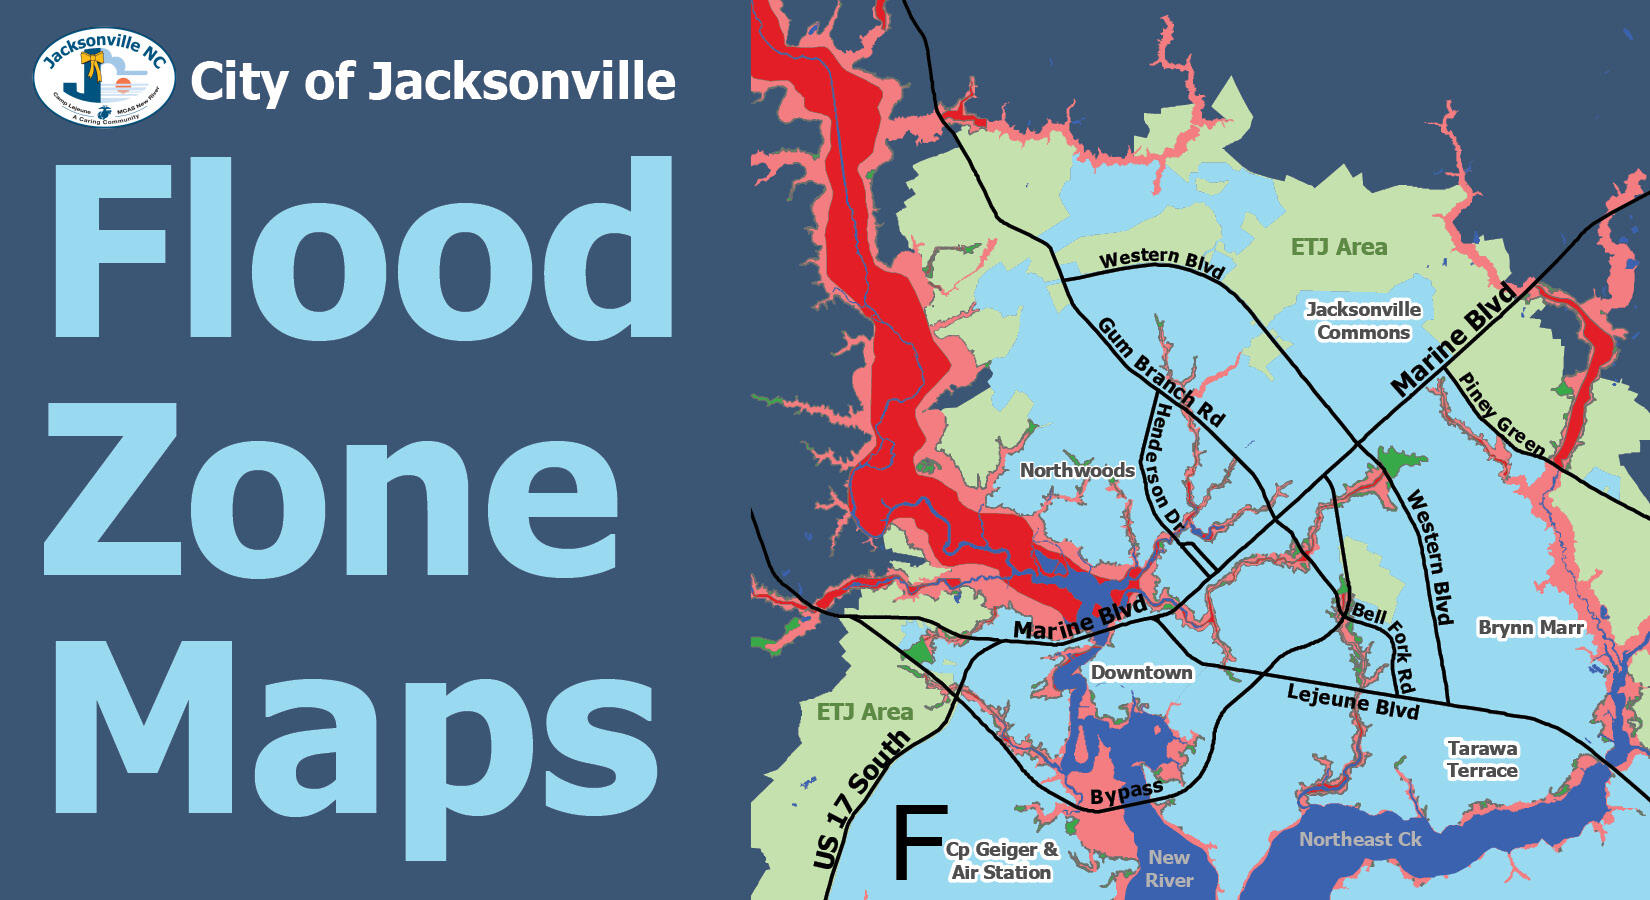 Jacksonville and Onslow County Flood Maps (City of Jacksonville